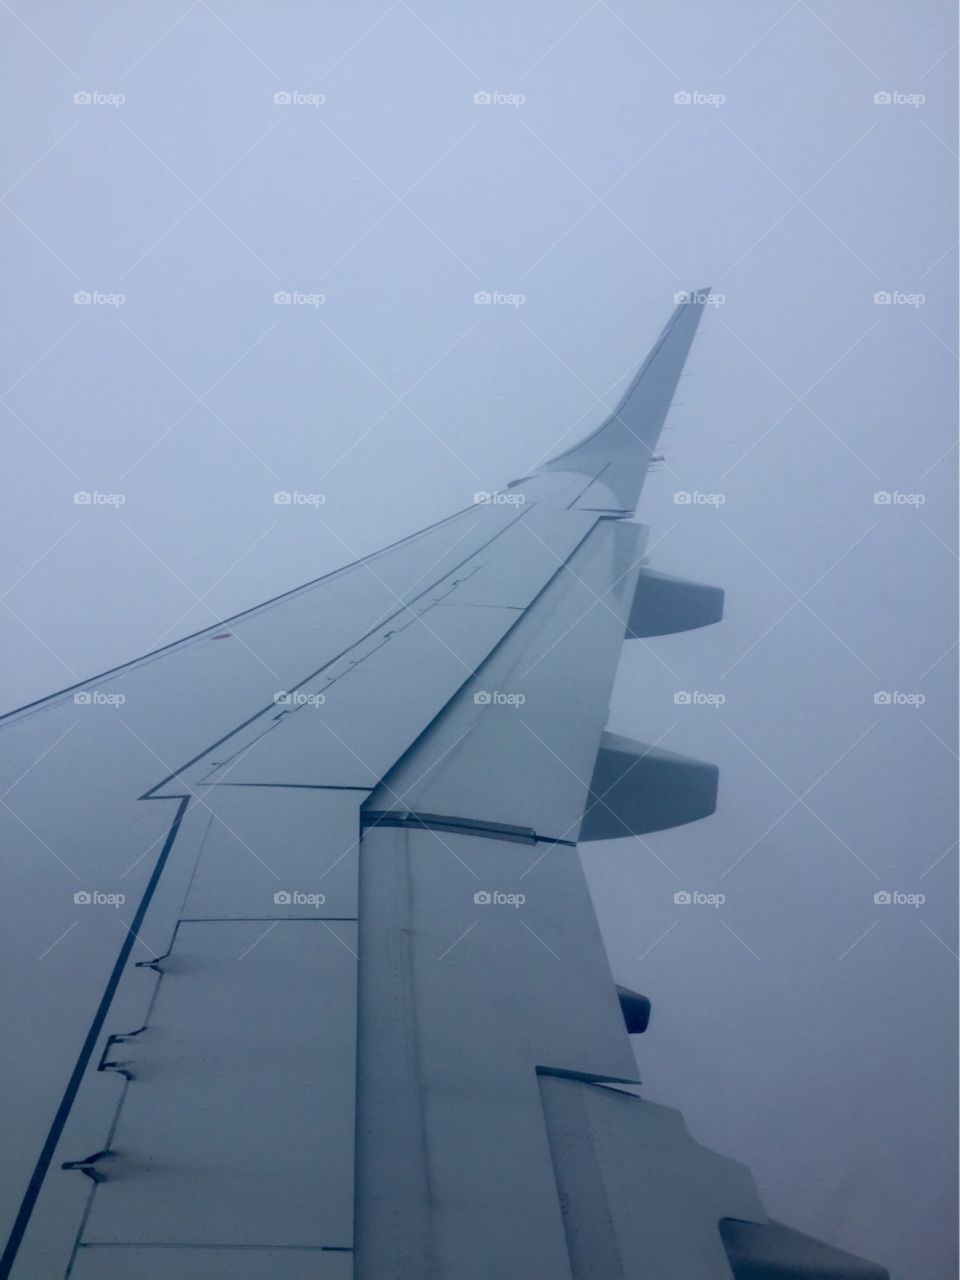 Traveling through the foggy skies